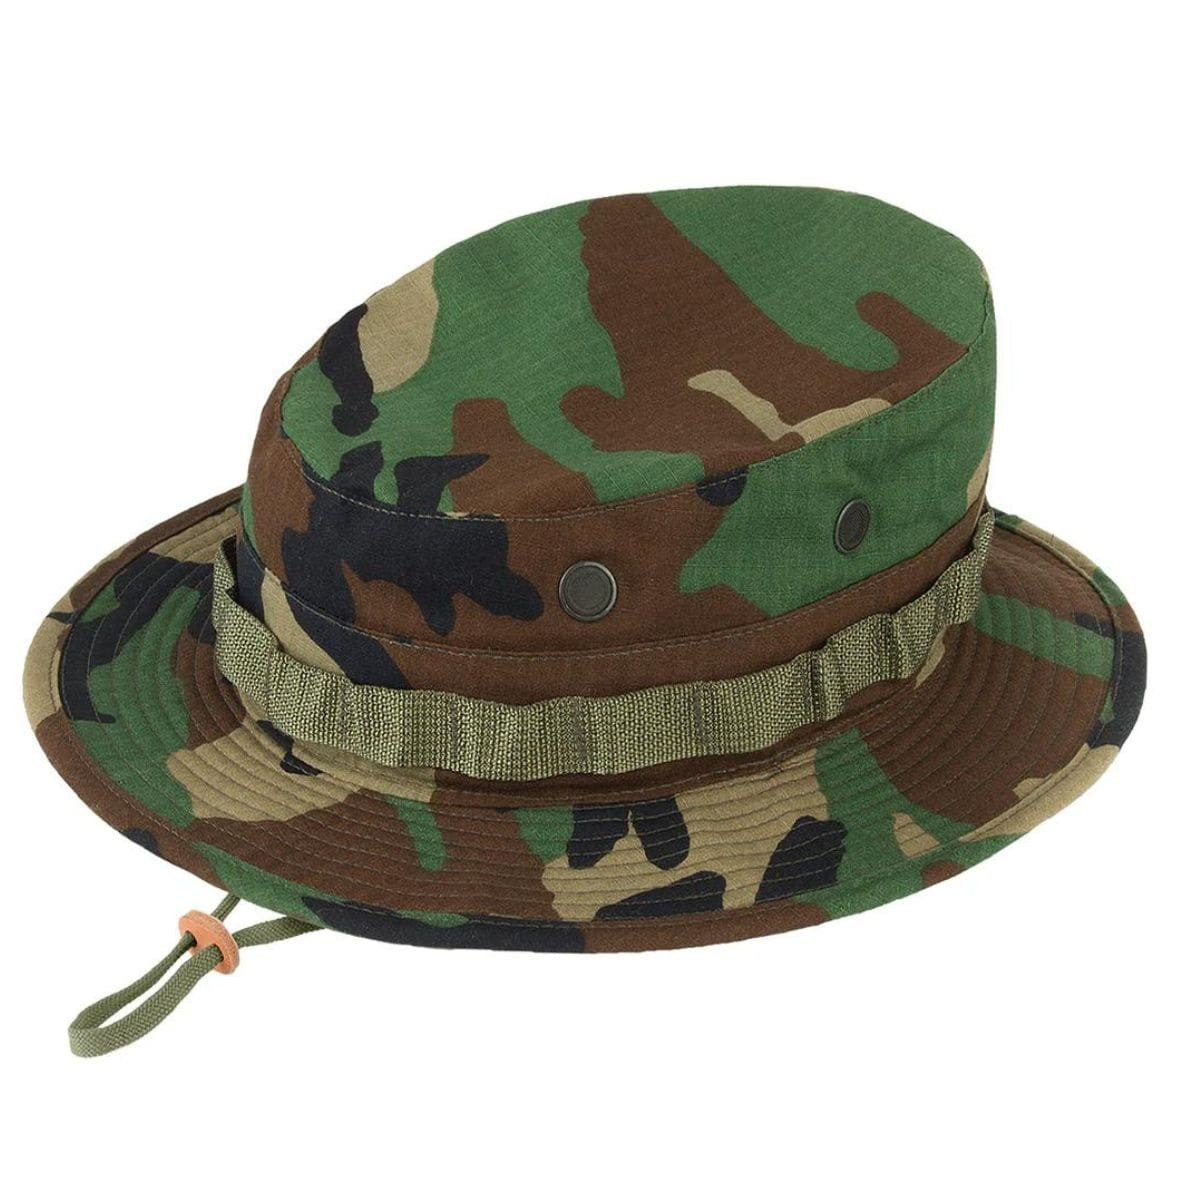 Image of U.S. Issue Boonie Jungle Hat, Nyco Rip-Stop